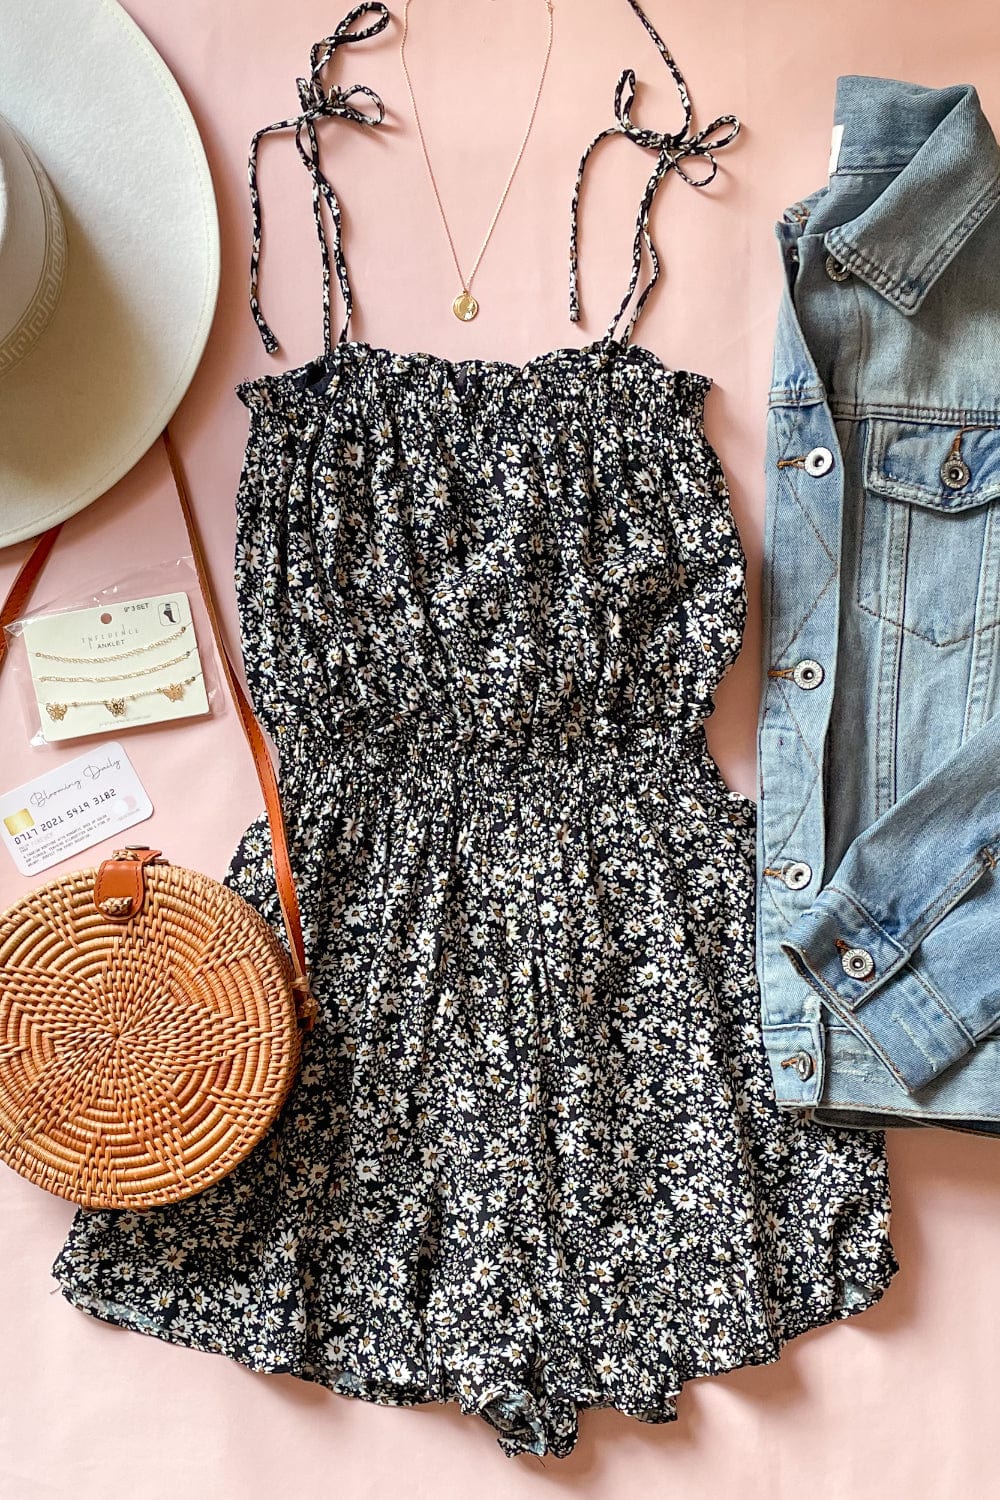 Dainty Daisy Romper - Jumpsuits & Rompers - Blooming Daily